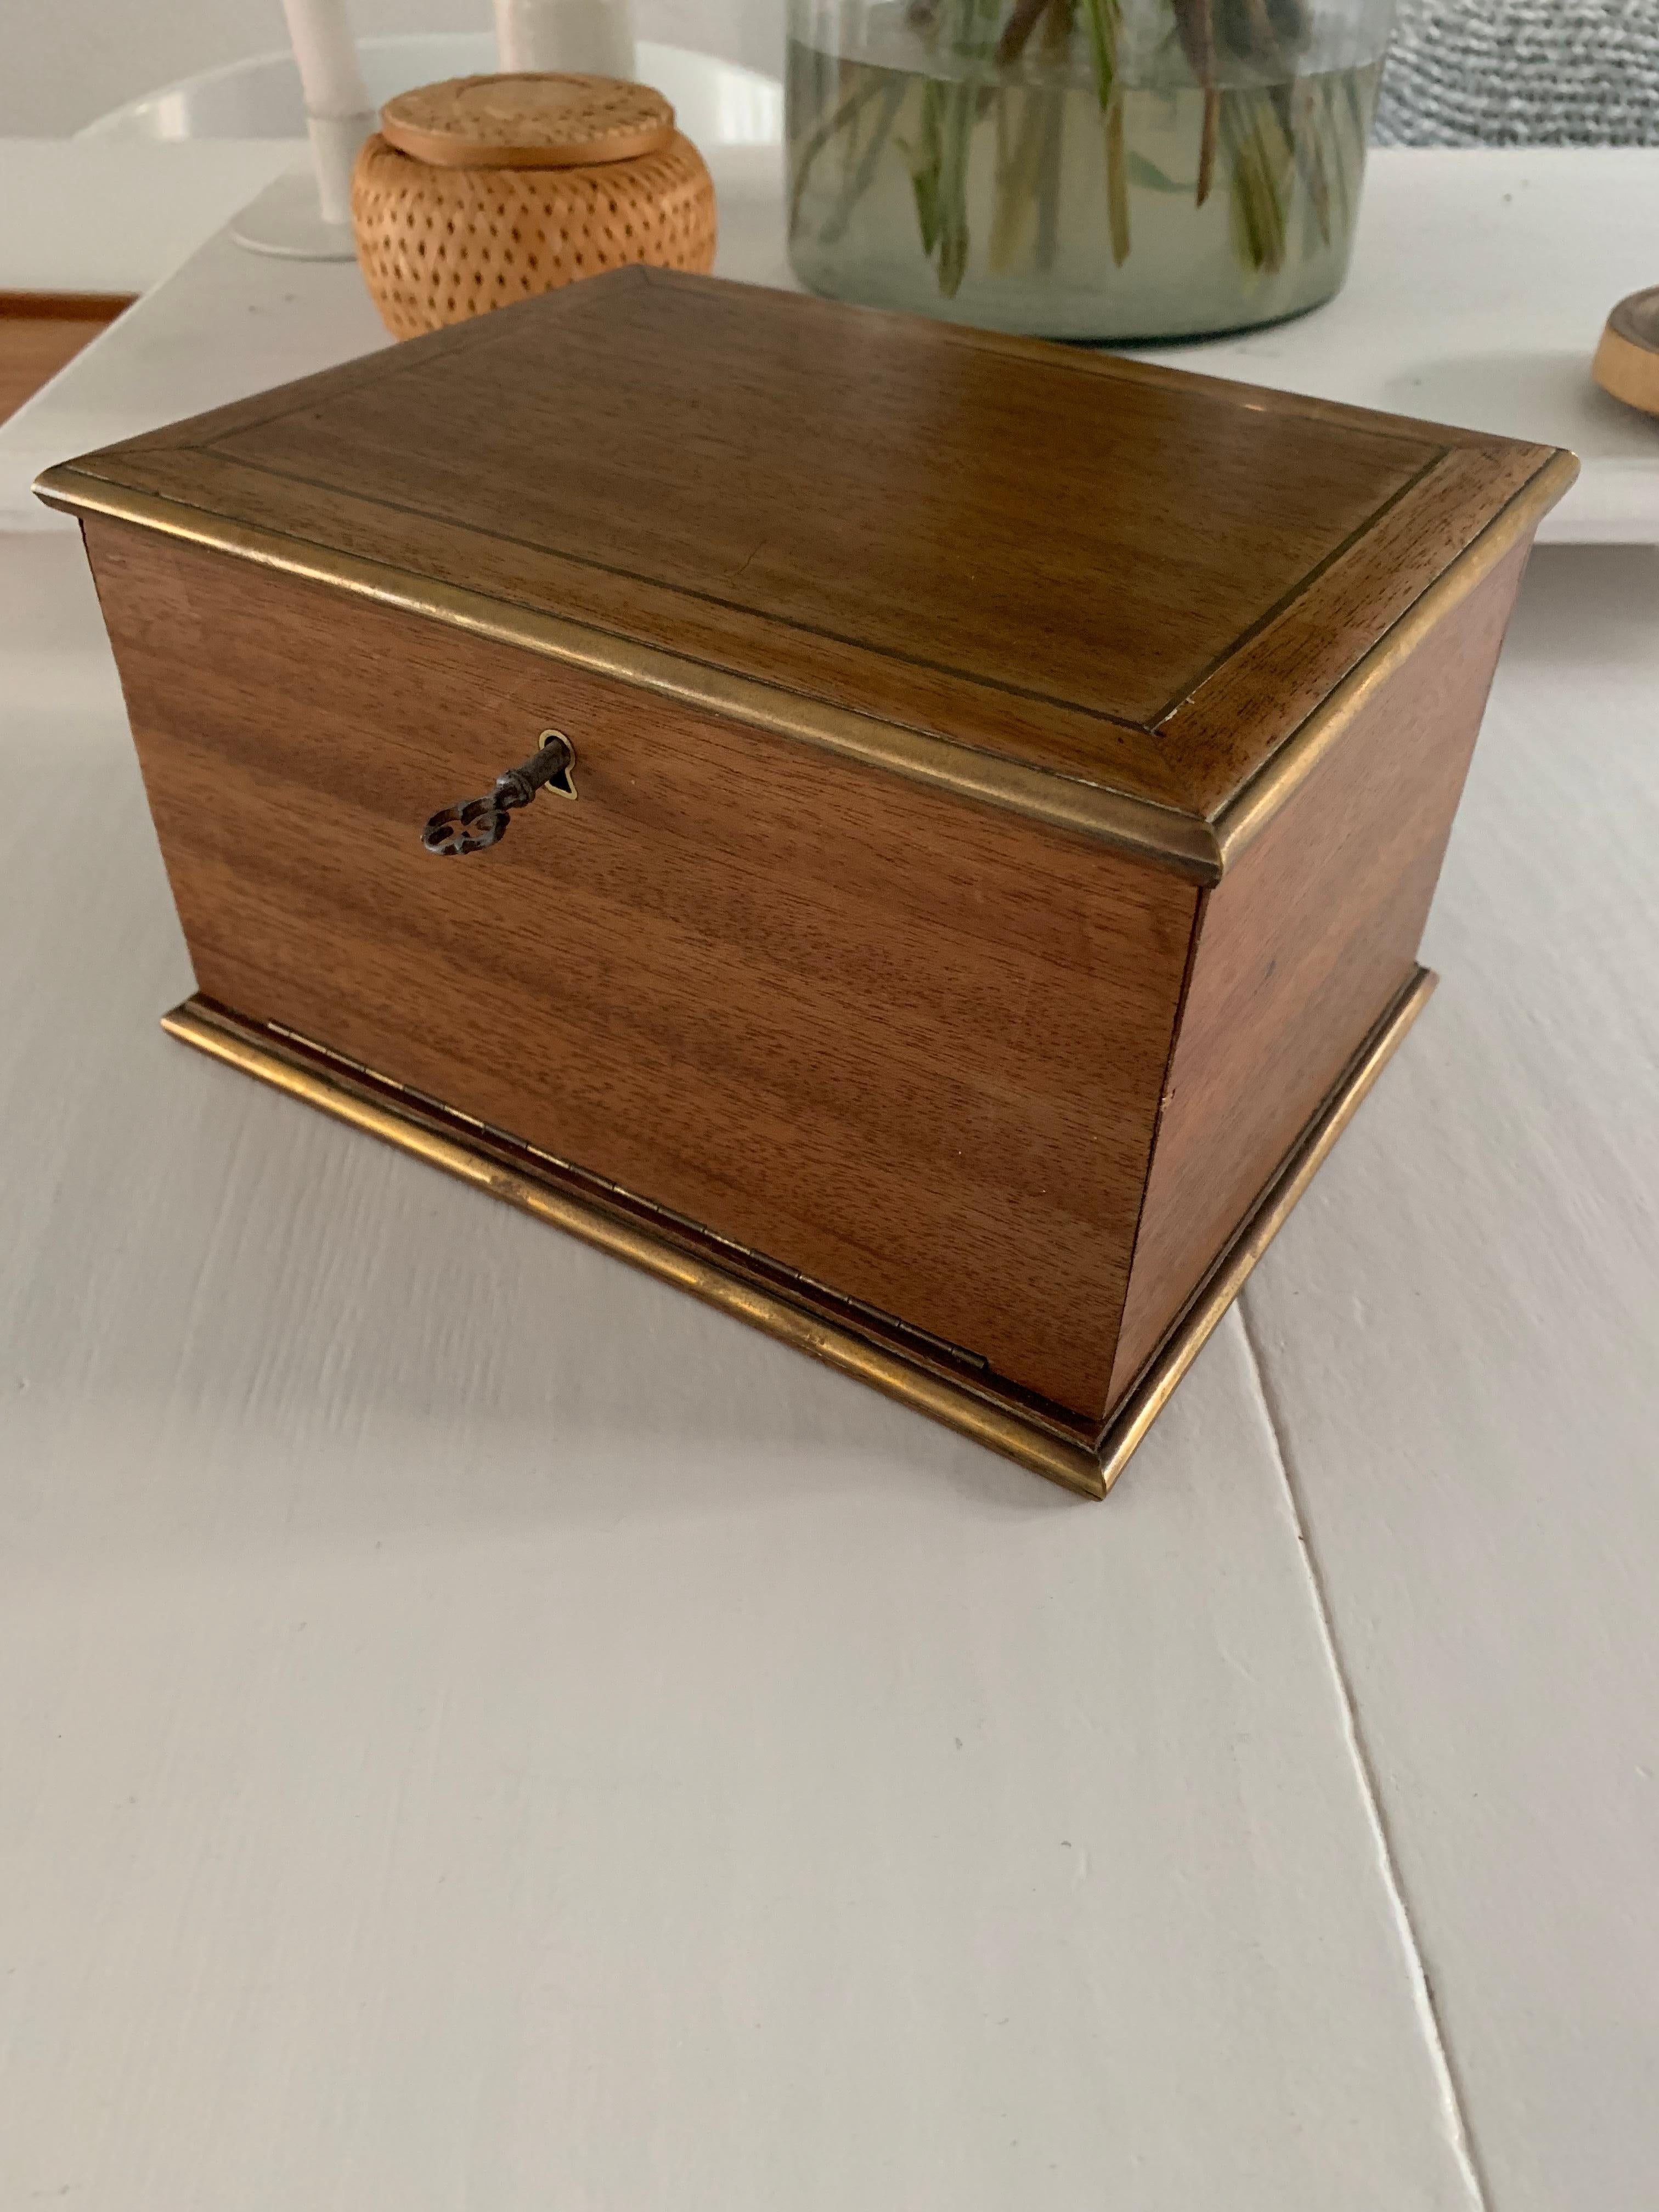 Napoleon III Handcrafted Nutwood Cigar Humidor Box with Brass Edging and Inlay For Sale 9